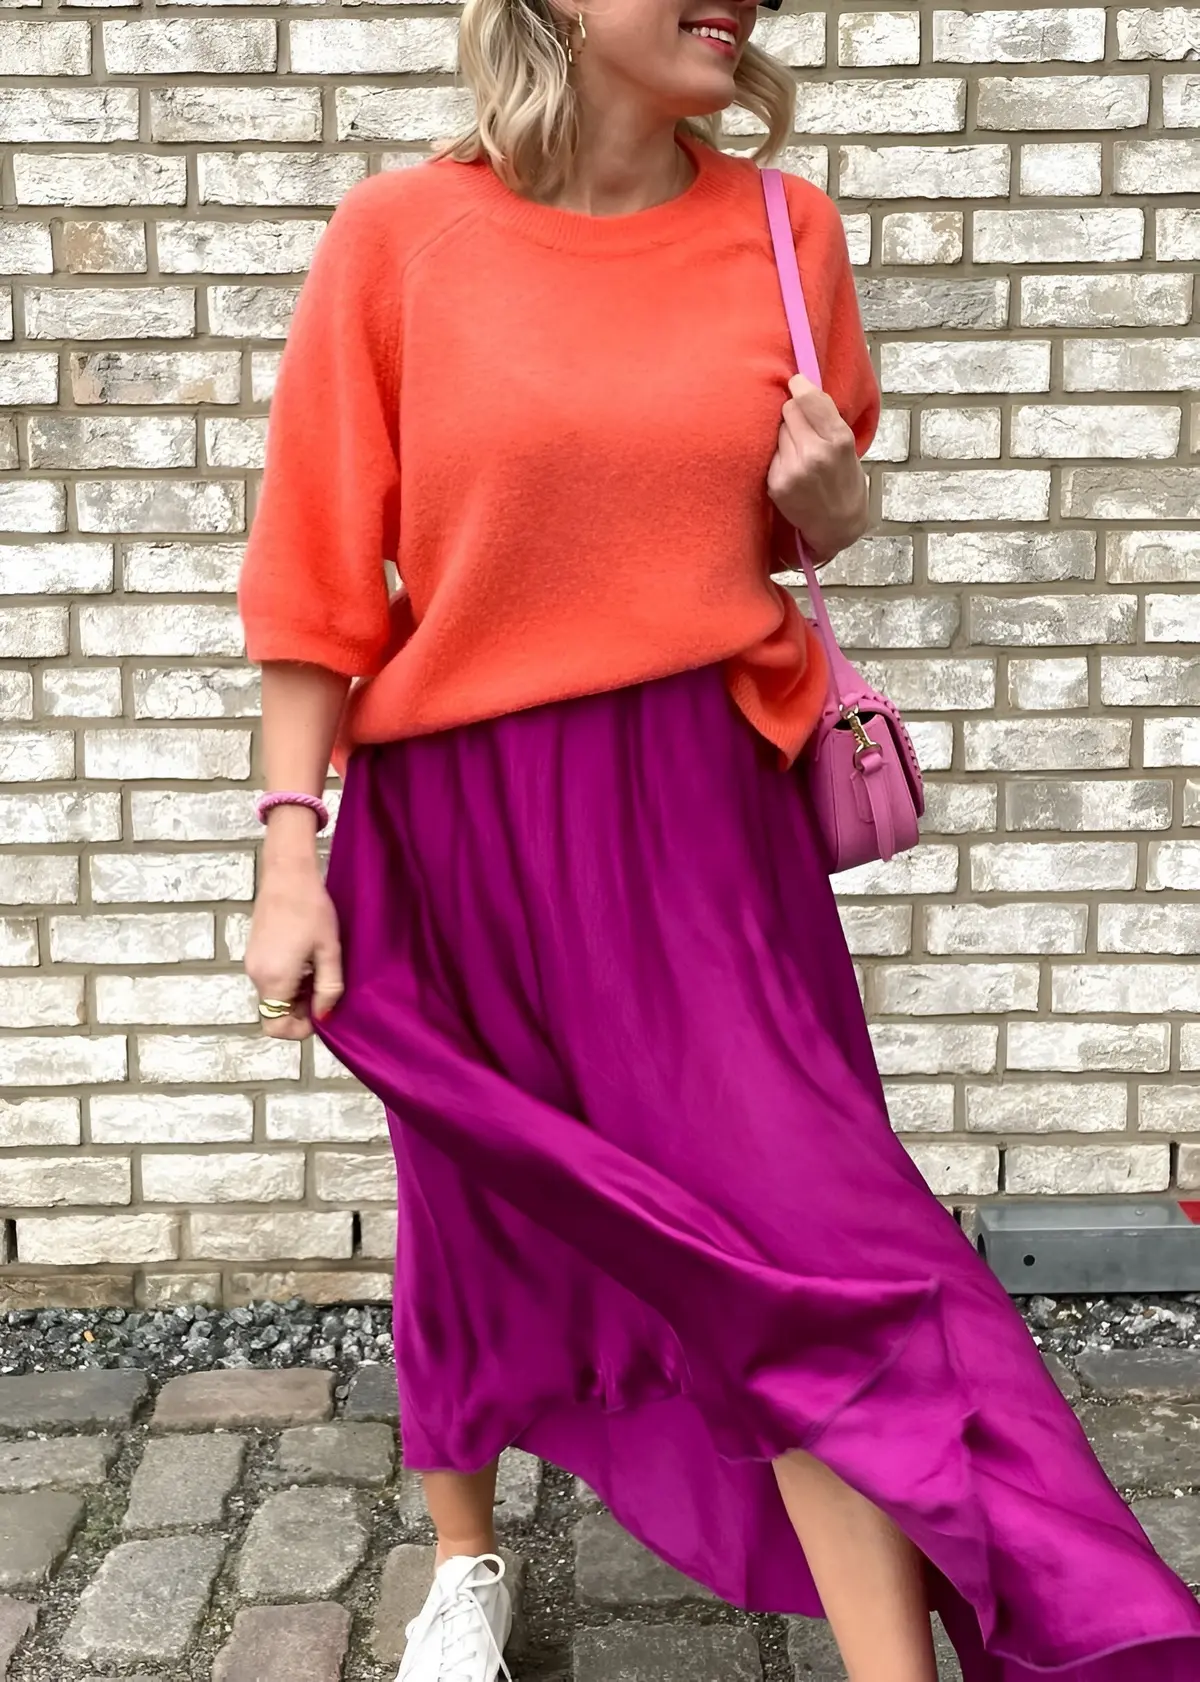 plum purple skirt outfit for spring with orange sweater and white sneakers